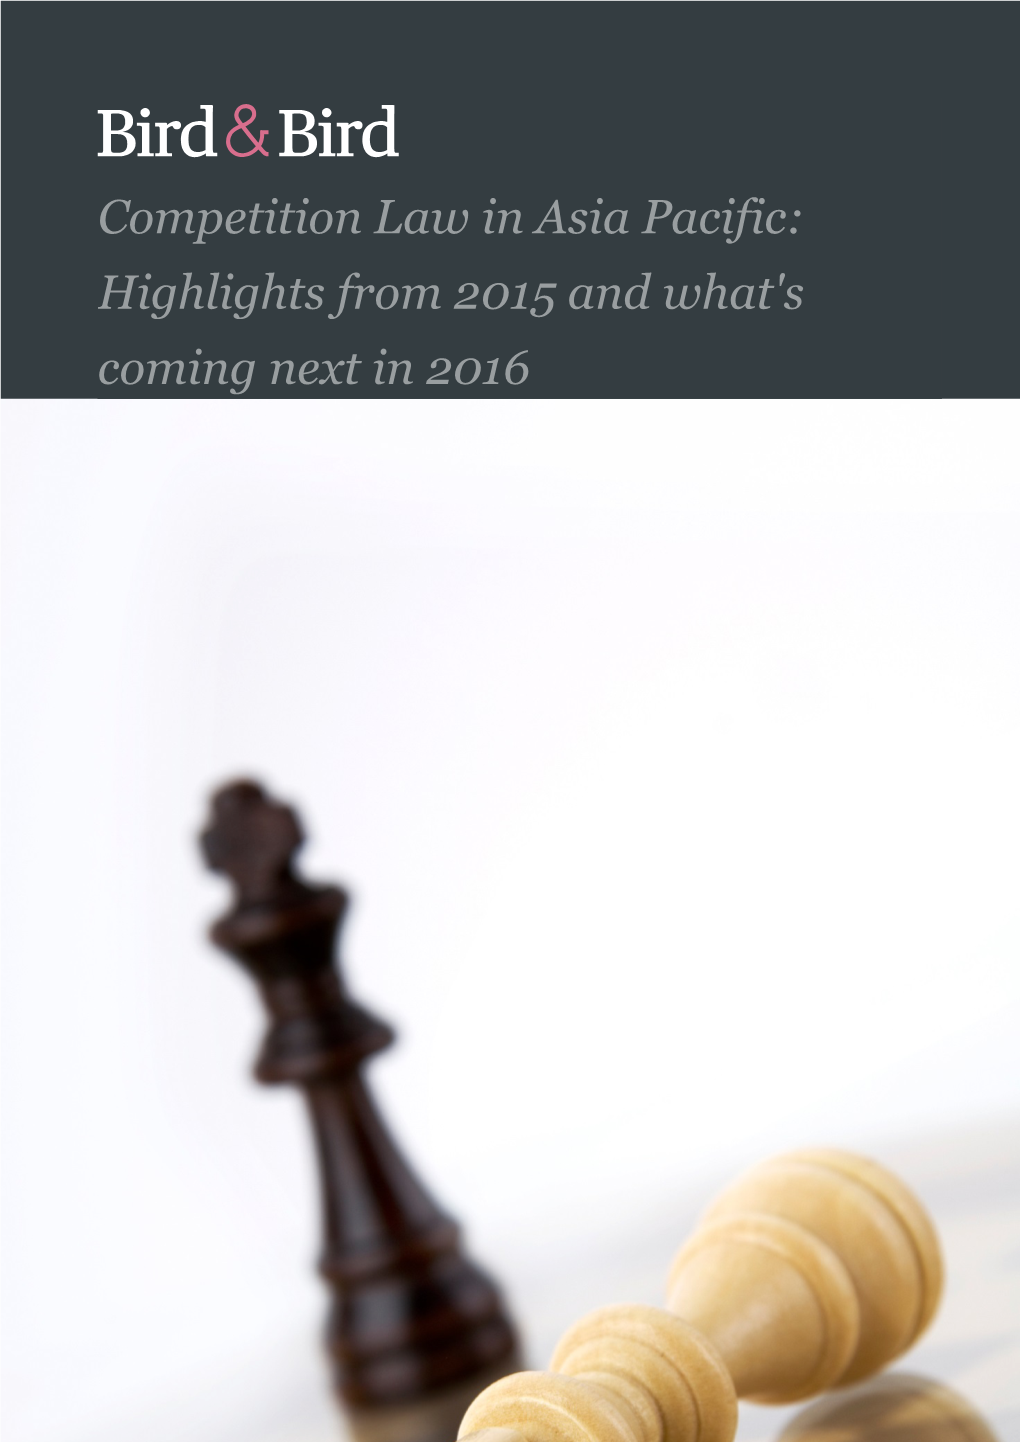 Competition Law in Asia Pacific: Highlights from 2015 and What's Coming Next in 2016